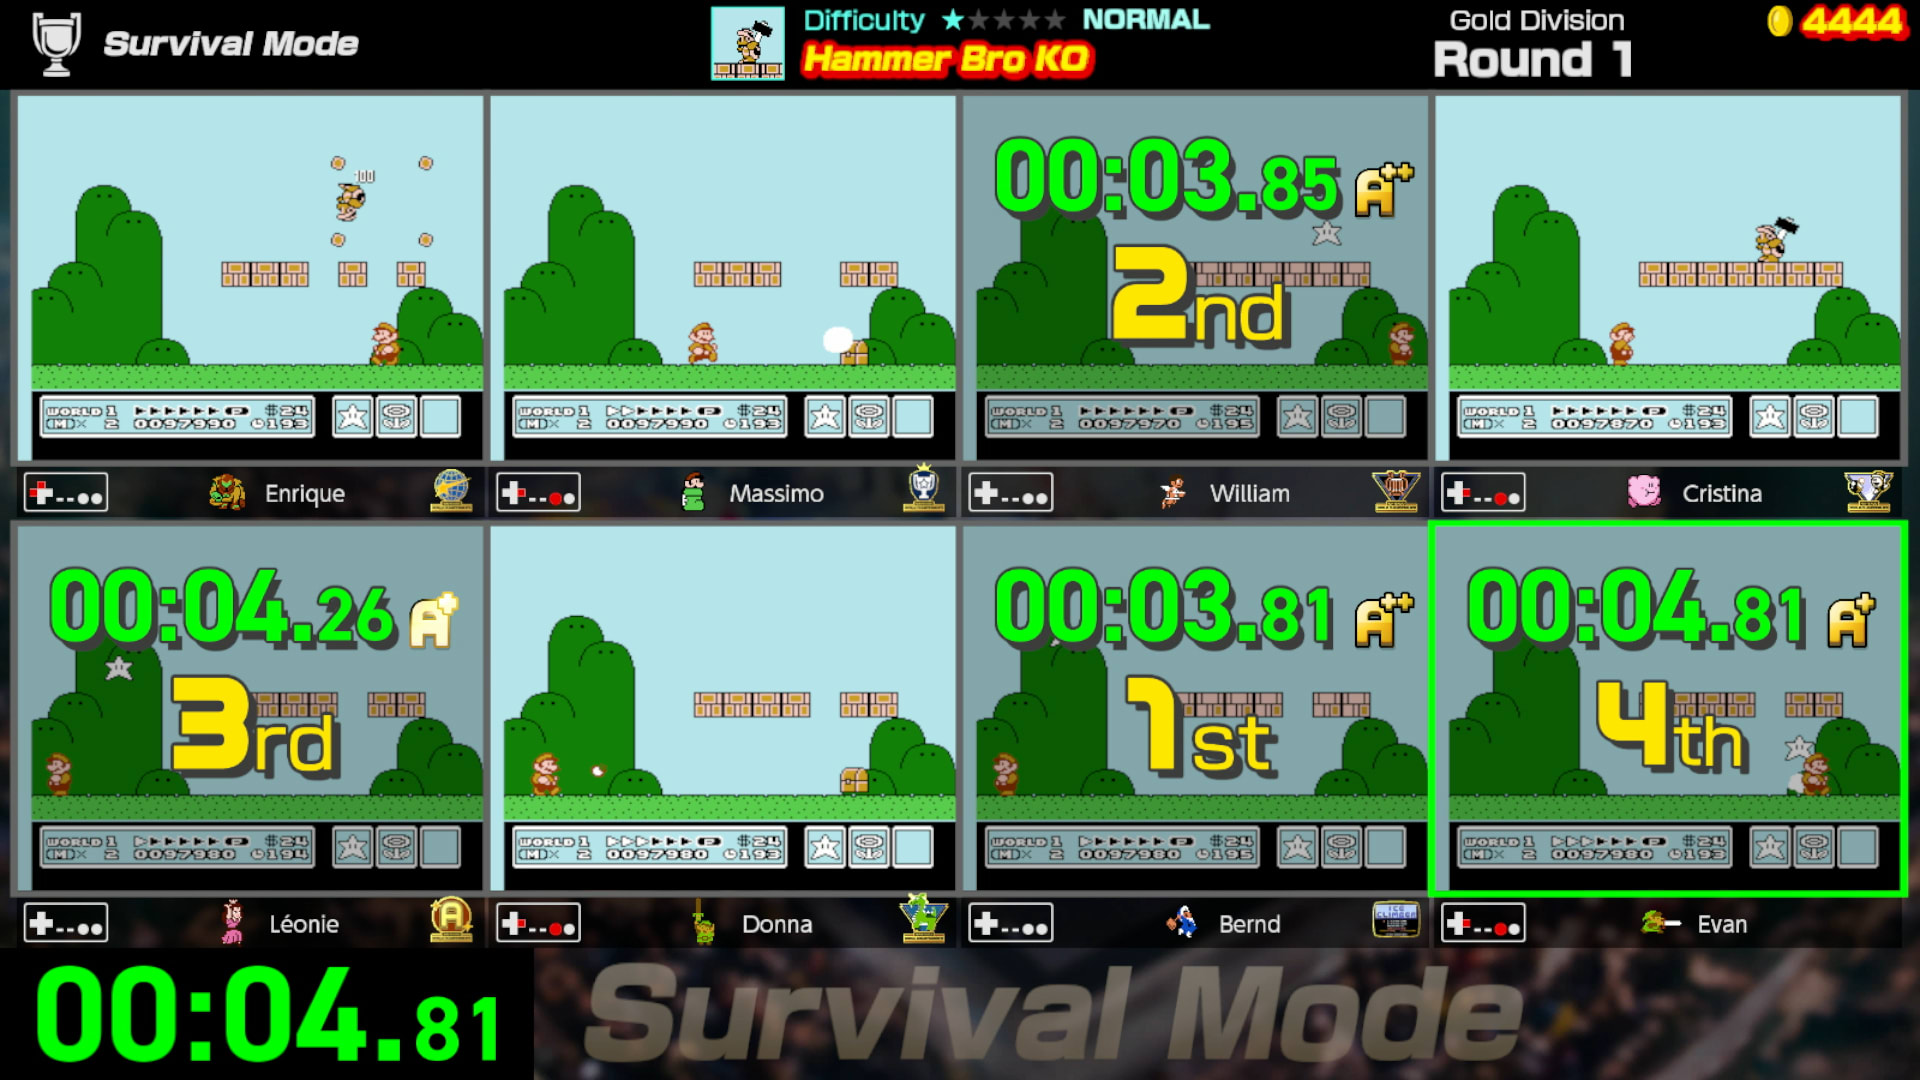 The screen is split into eight windows as eight players compete at the same time on the same system. When a player has completed the challenge, their time, letter ranking, and completion spot are displayed in their window.